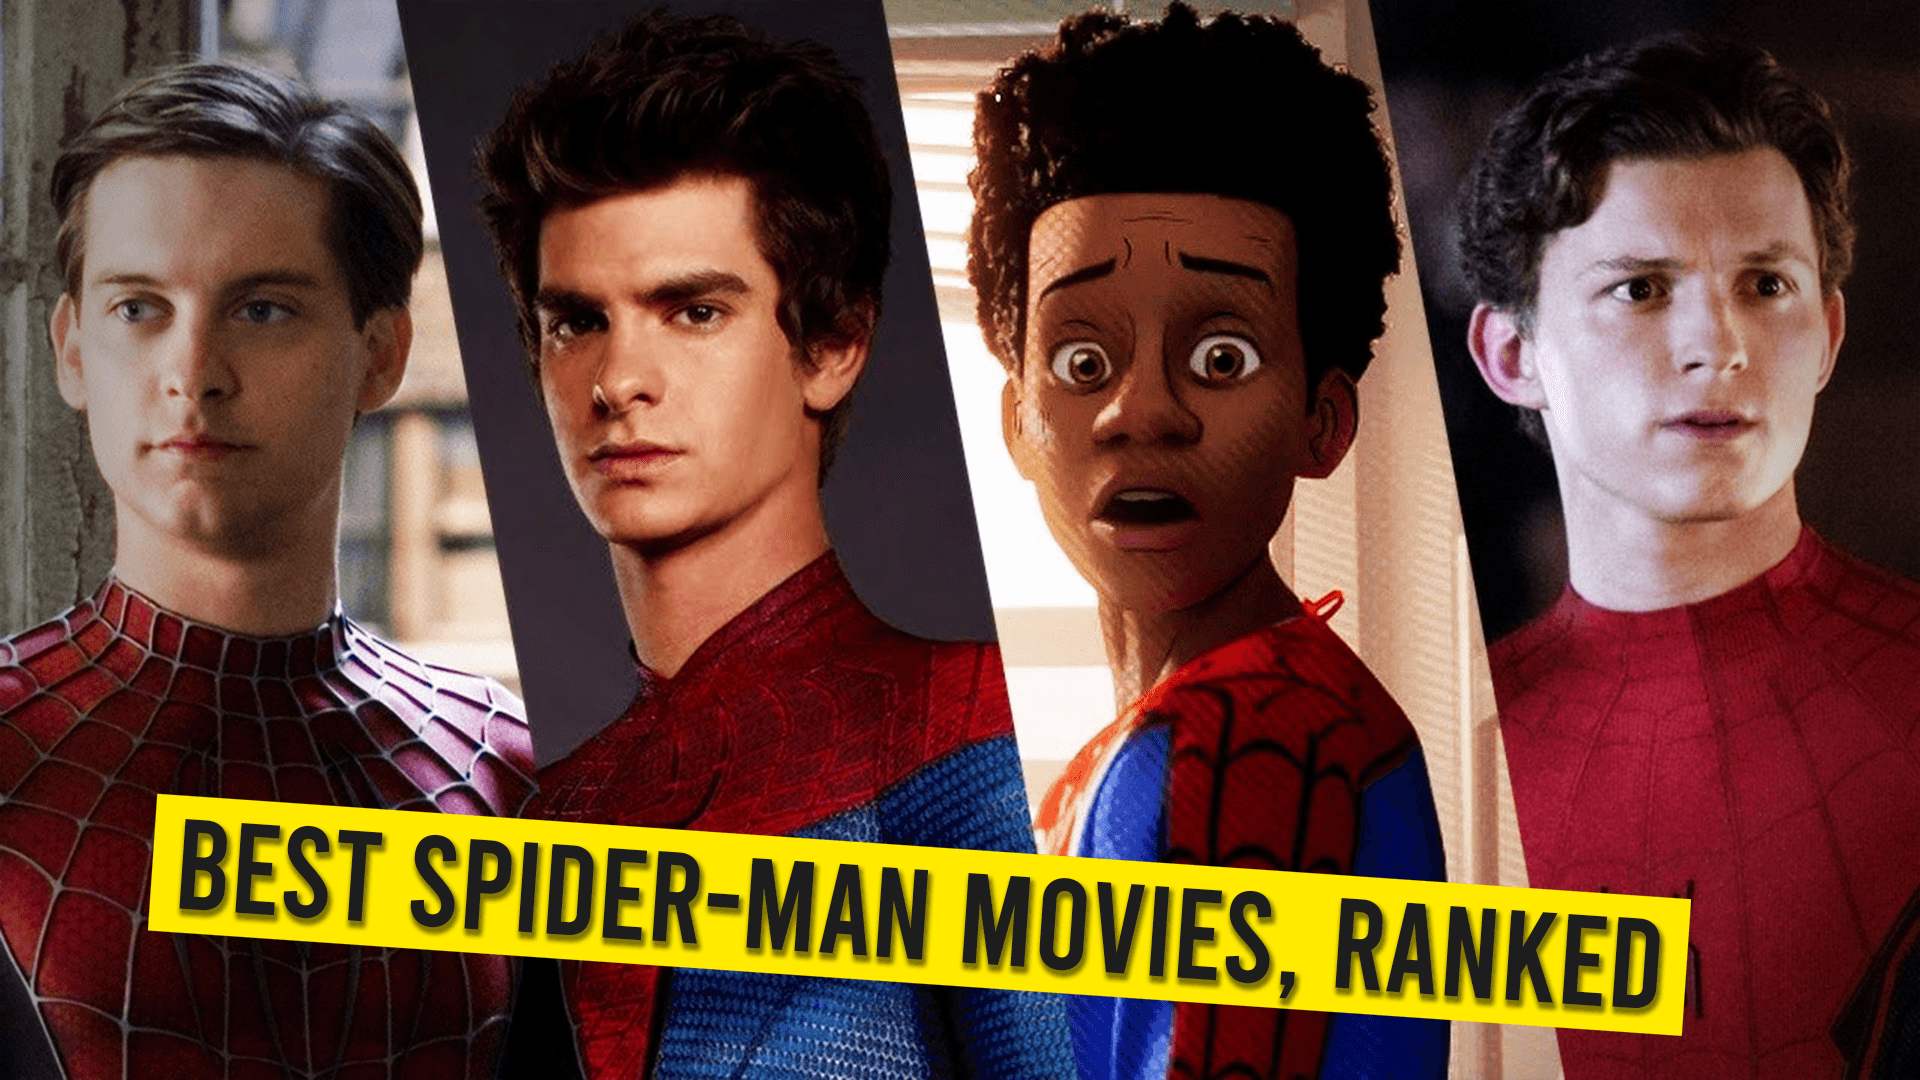 The Best Spider-Man Movies, Ranked By Fans